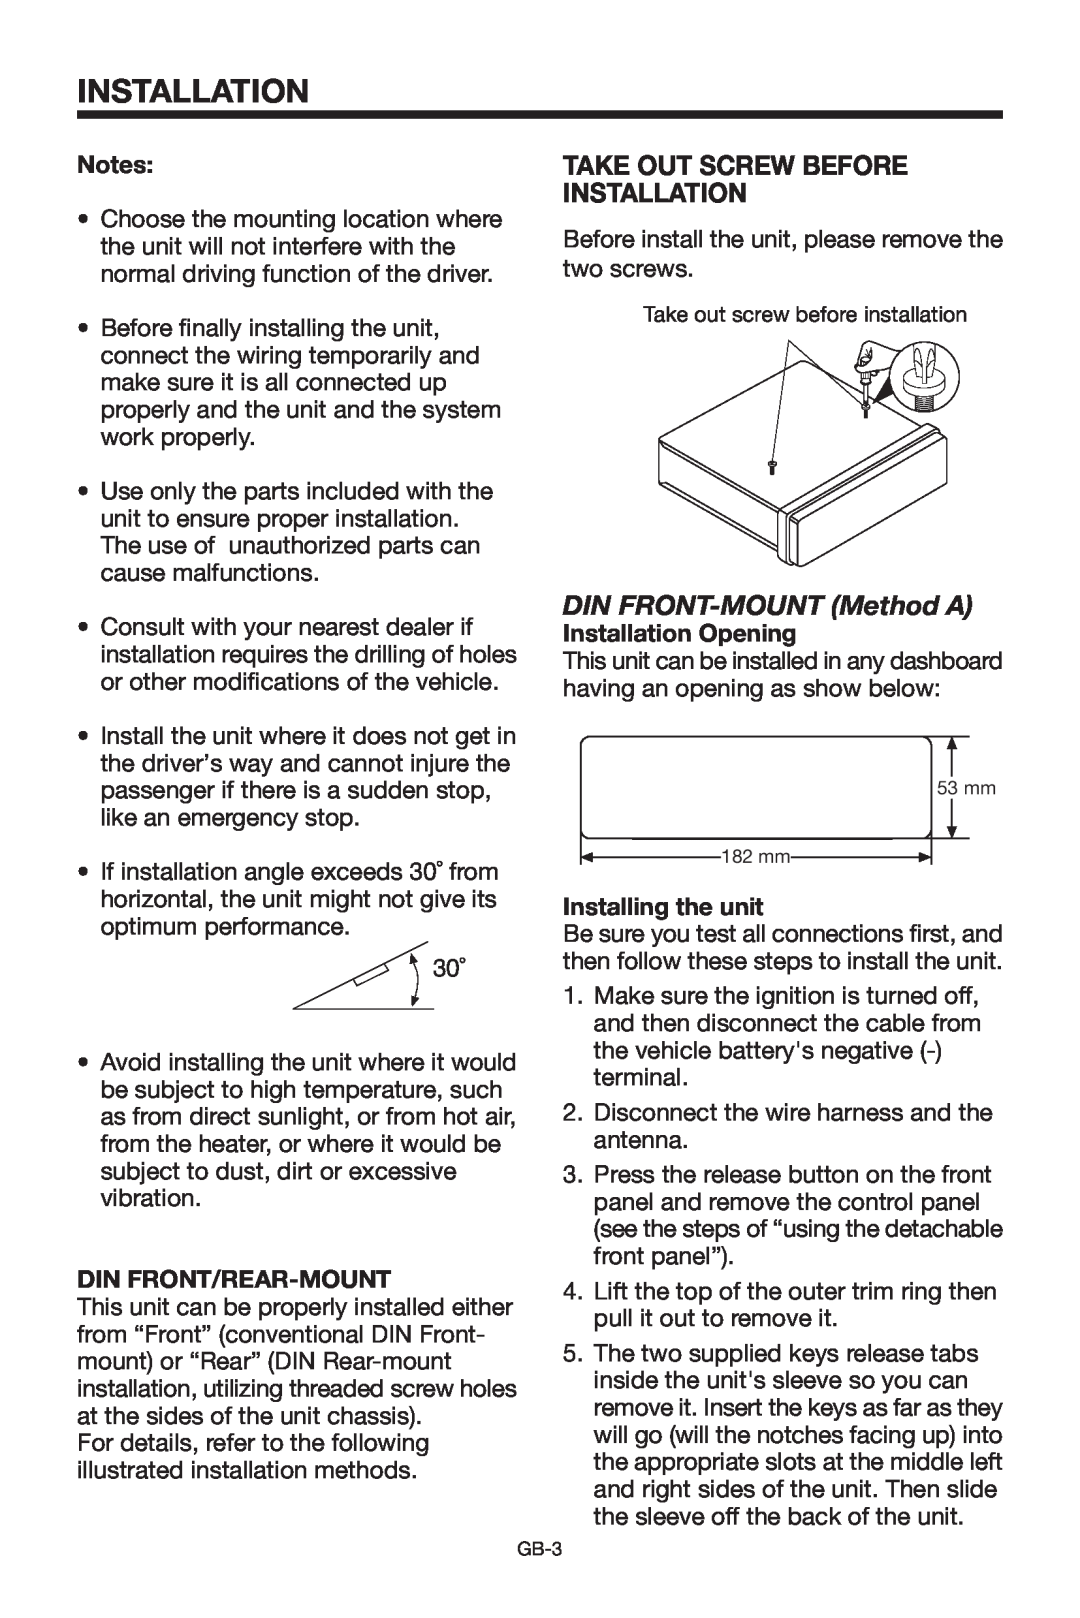 Lenco Marine CS-1004 owner manual Take Out Screw Before Installation, DIN FRONT-MOUNTMethod A 